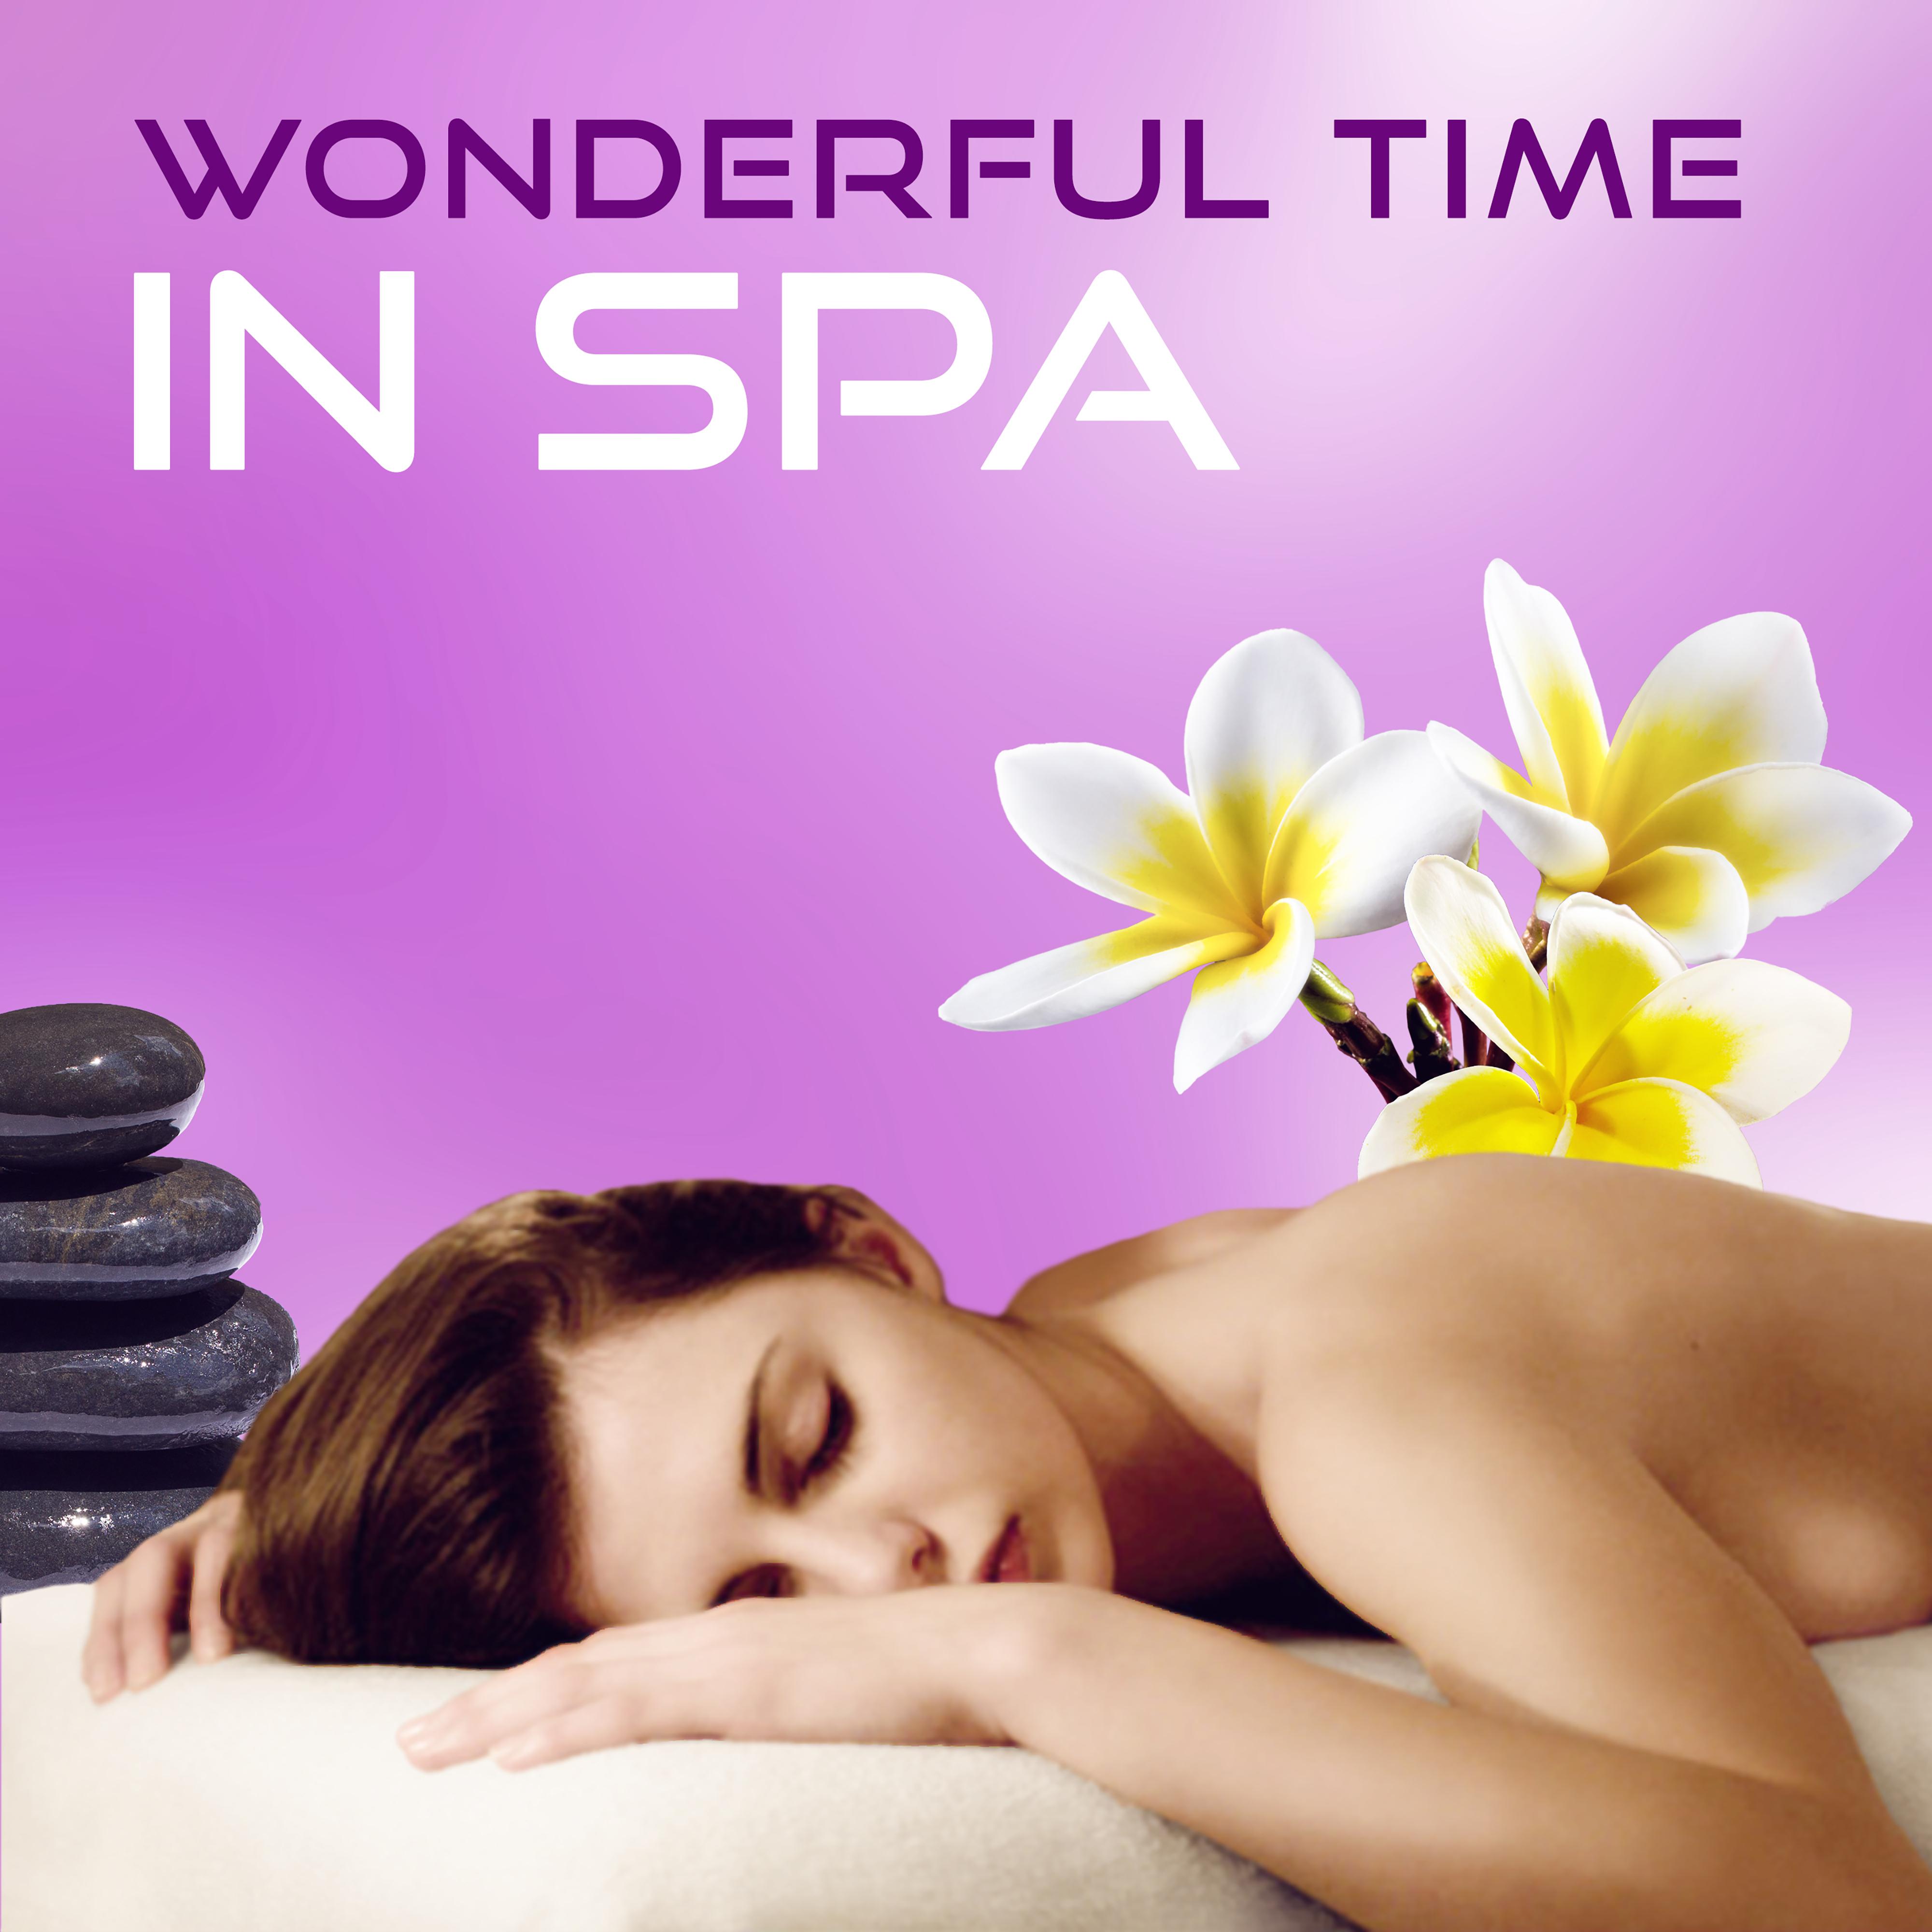 Wonderful Time in Spa  Healing Music for Wellness, Deep Relaxation, Sensual Massage, Serenity for Soul